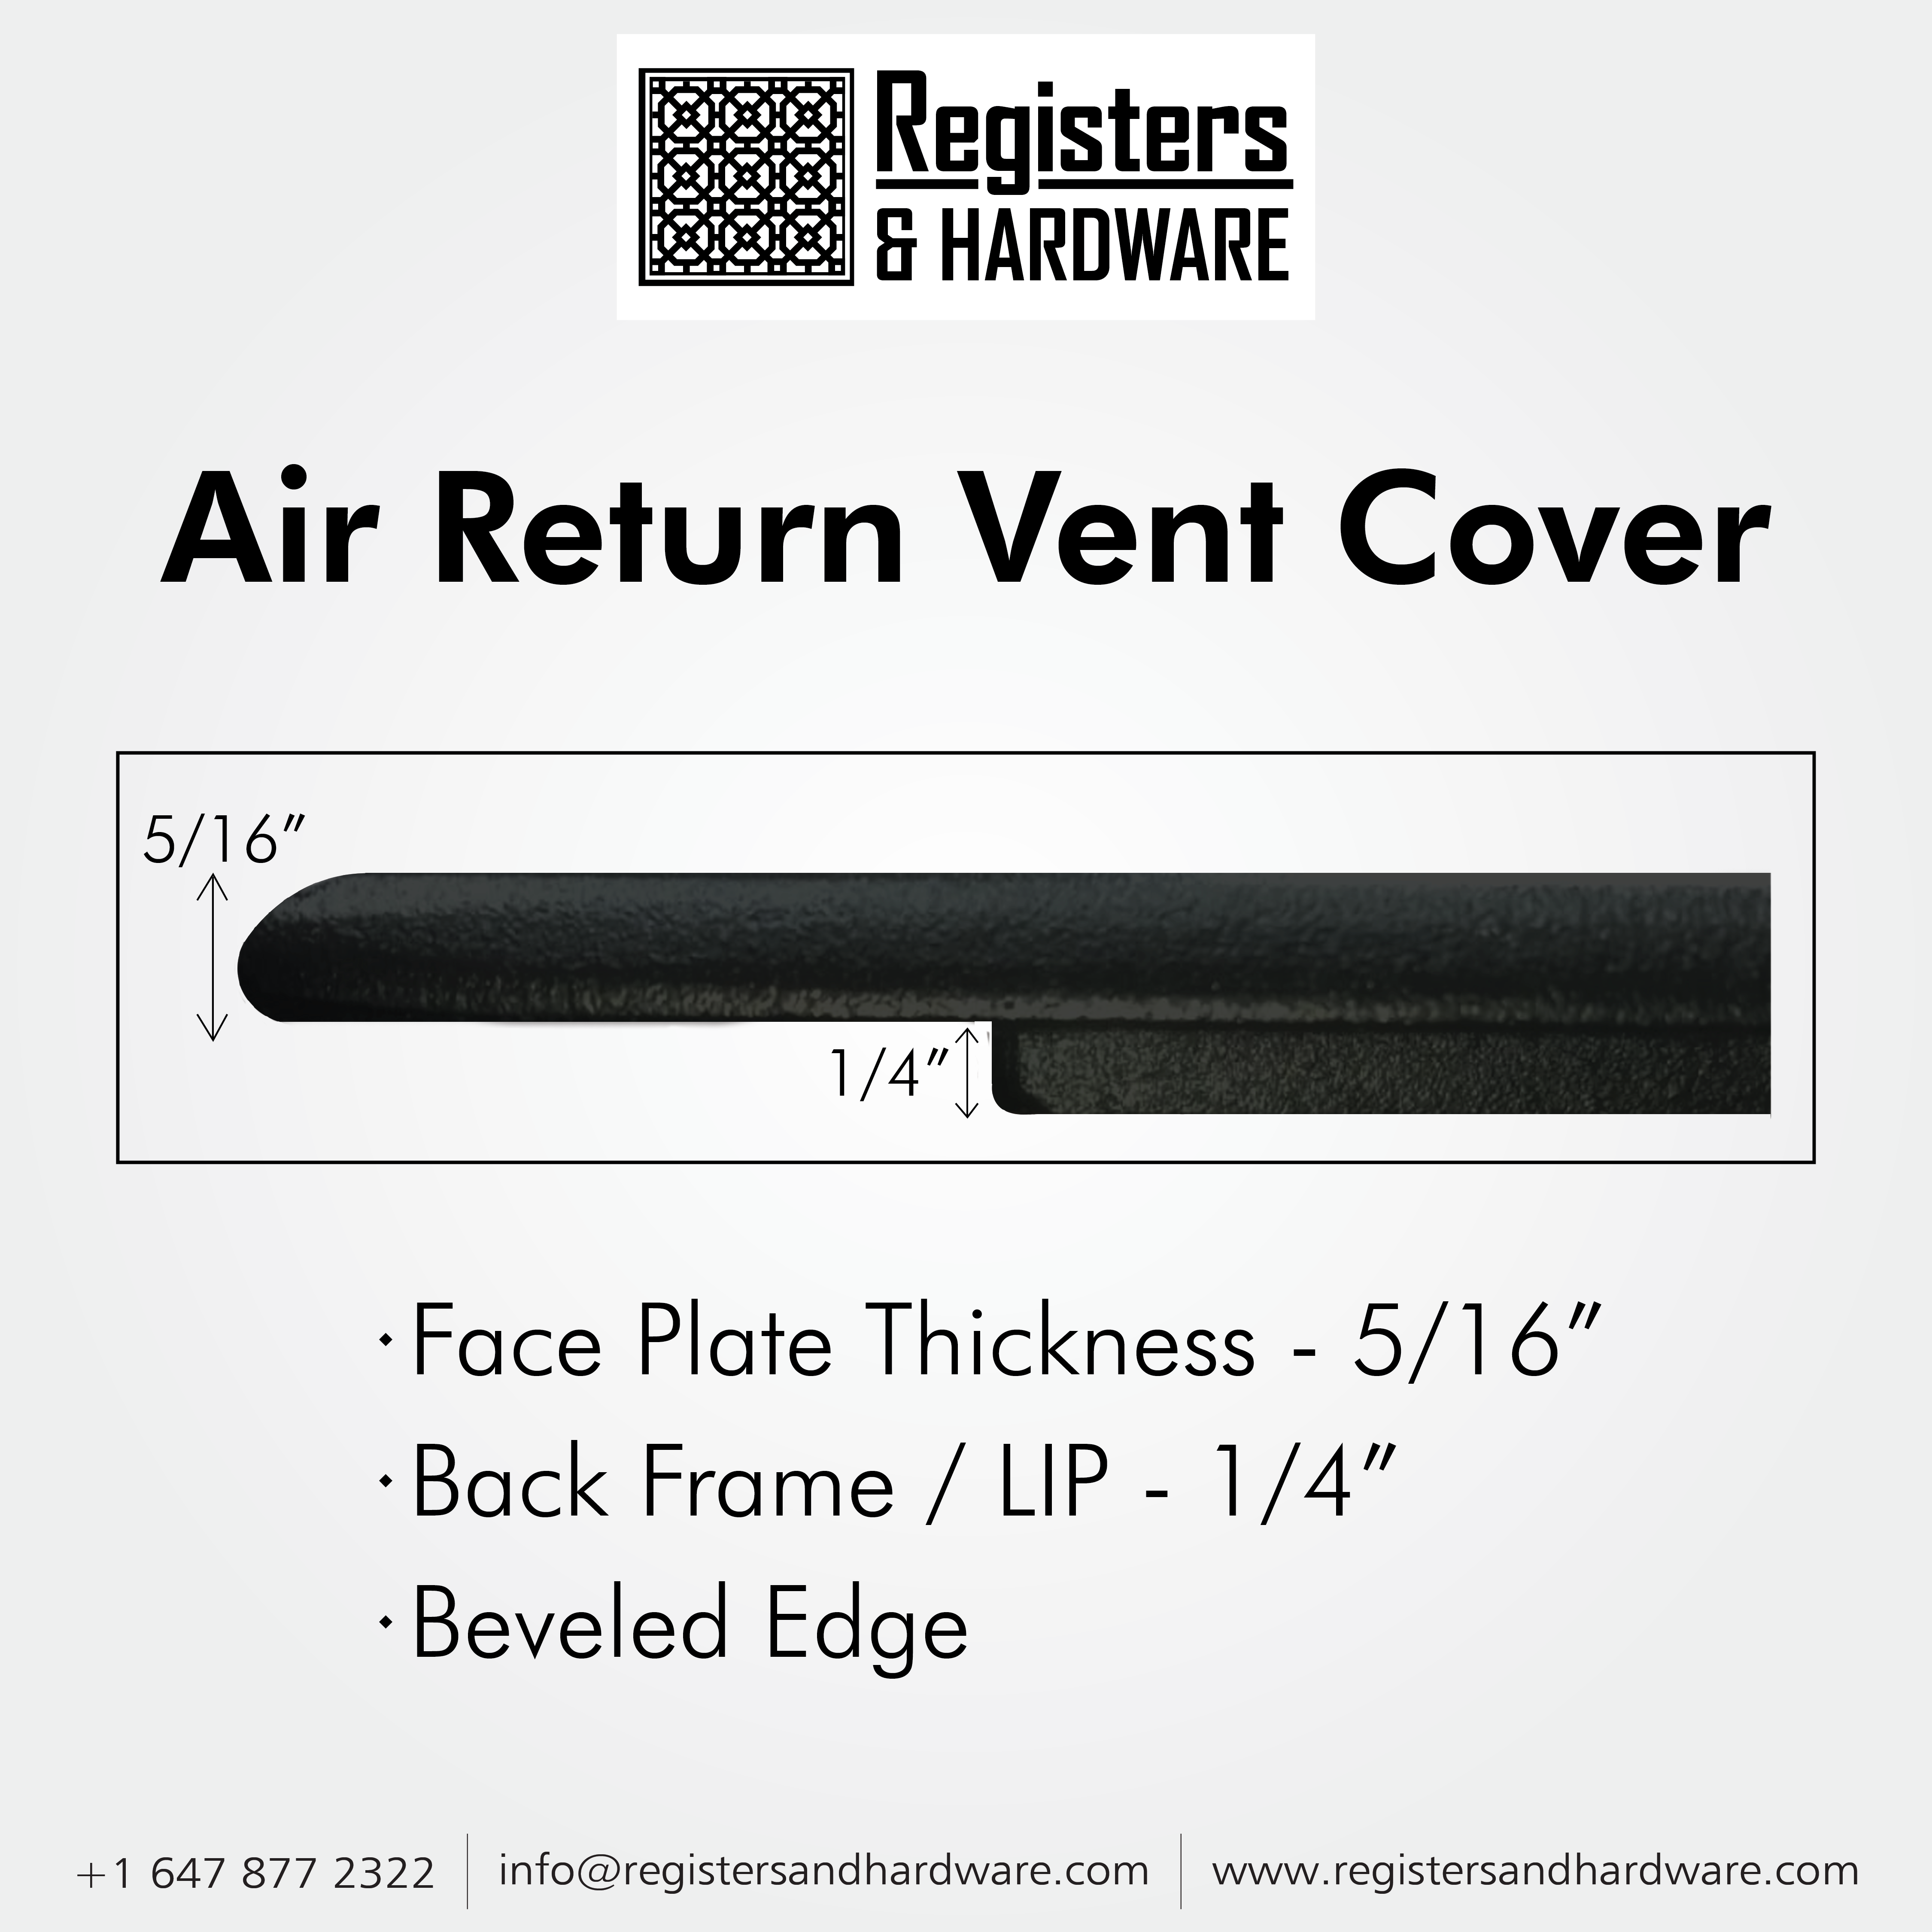 Achtek AIR RETURN 4"x12" Duct Opening (Overall Size 6"x14") | Heavy Cast Aluminum Air Grille / HVAC Duct Cover || Powder Coated